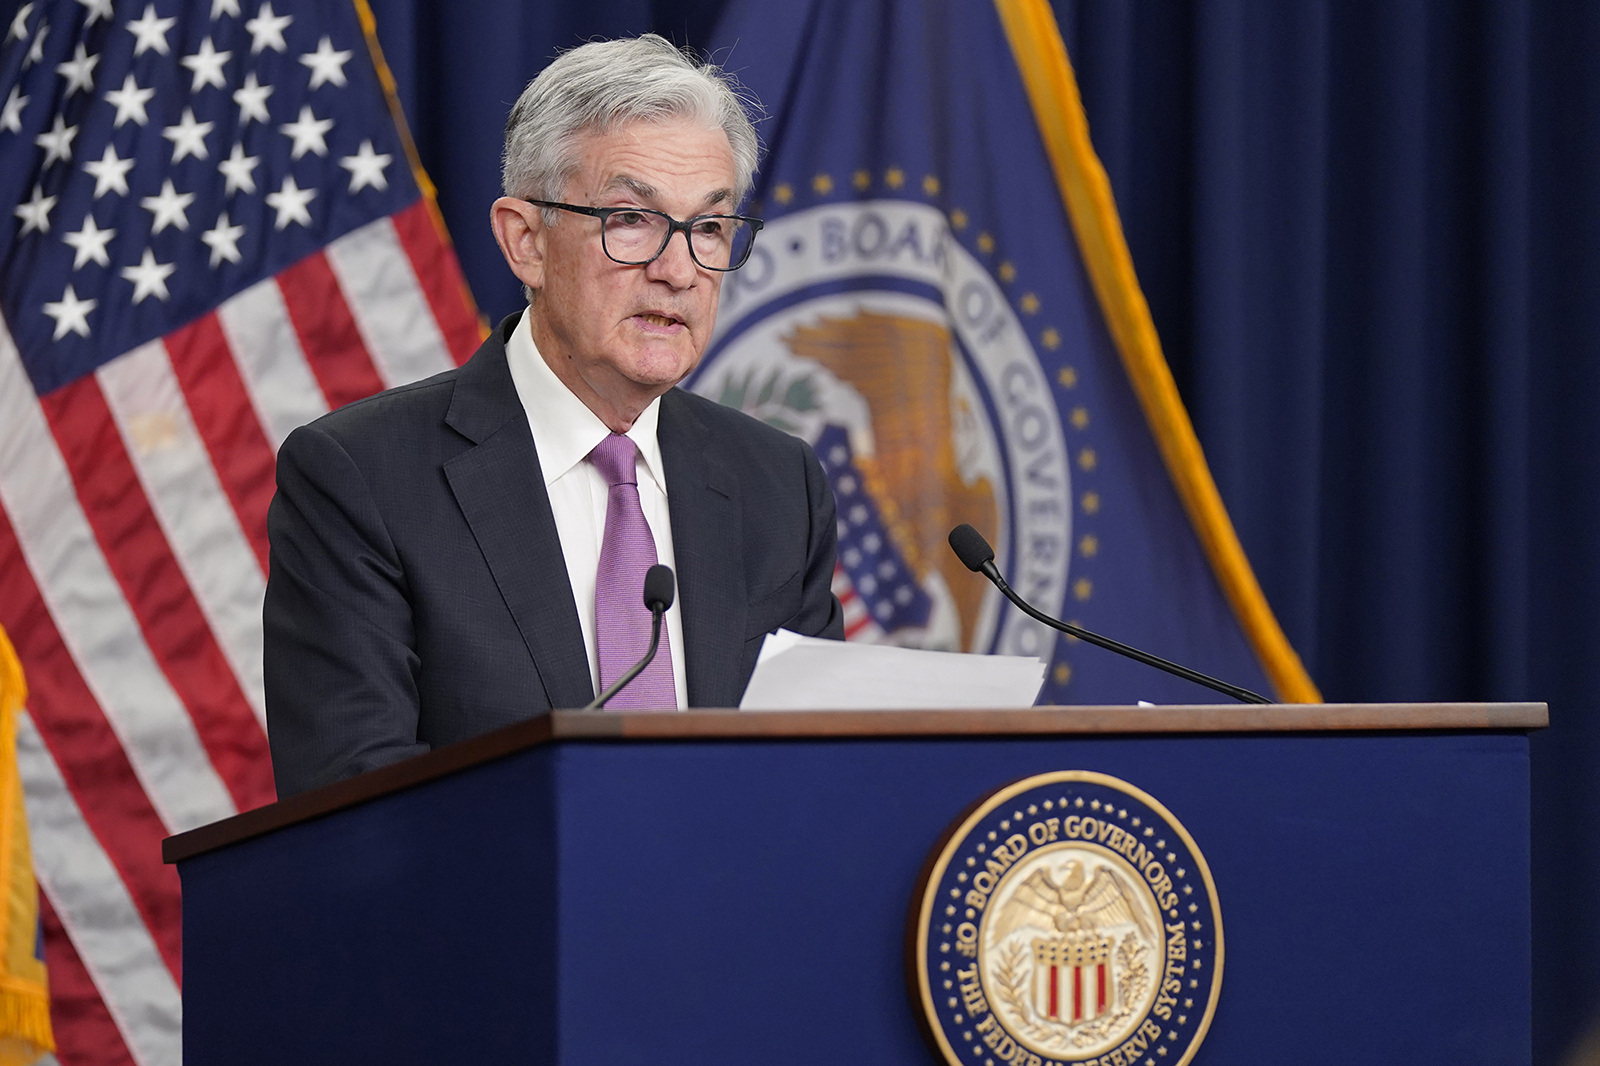 Federal Reserve Chairman Jerome Powell speaks during a news conference at the Federal Reserve Board building in Washington, Wednesday, July 27.